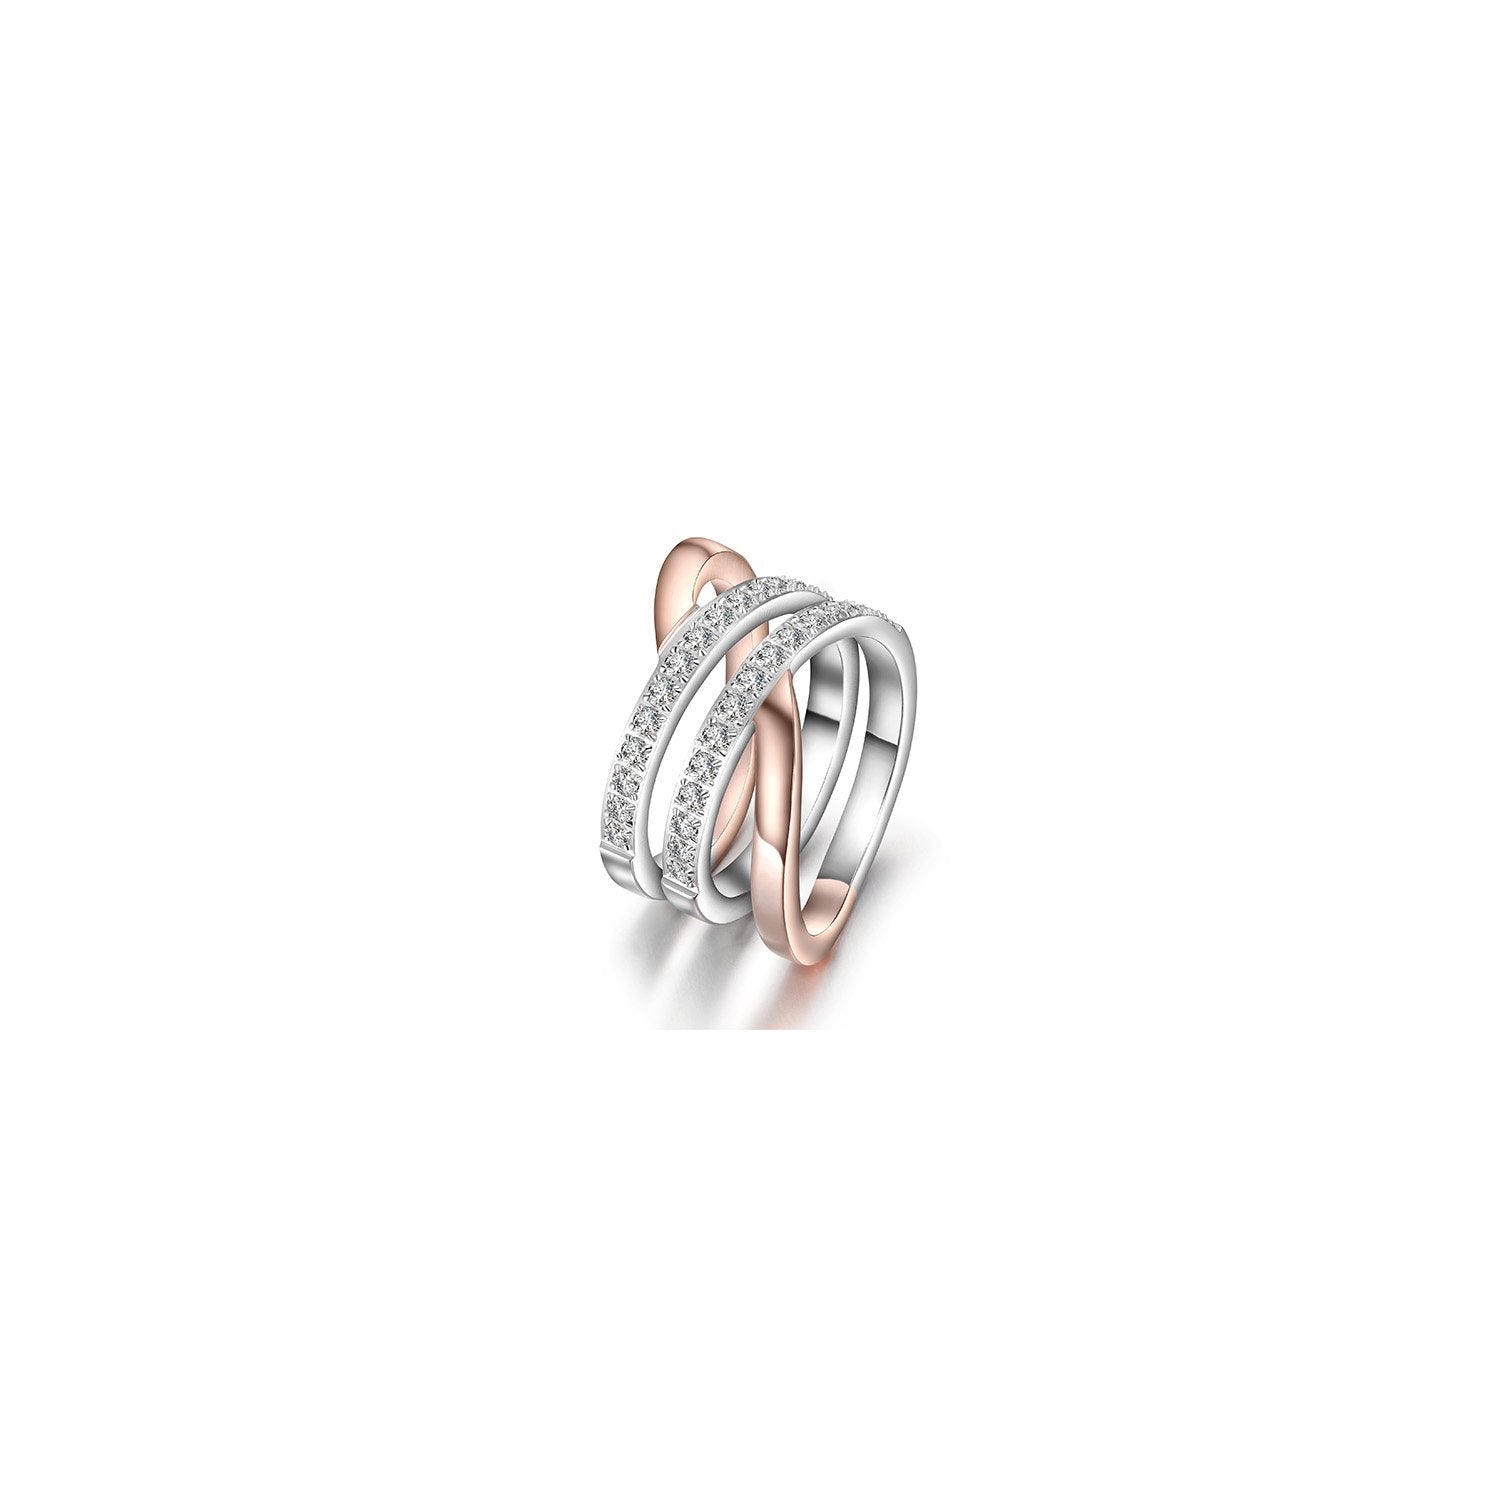 Rose Gold Wide Band Cocktail Ring with CZ - Jewelry & Watches - Bijou Her -  -  - 